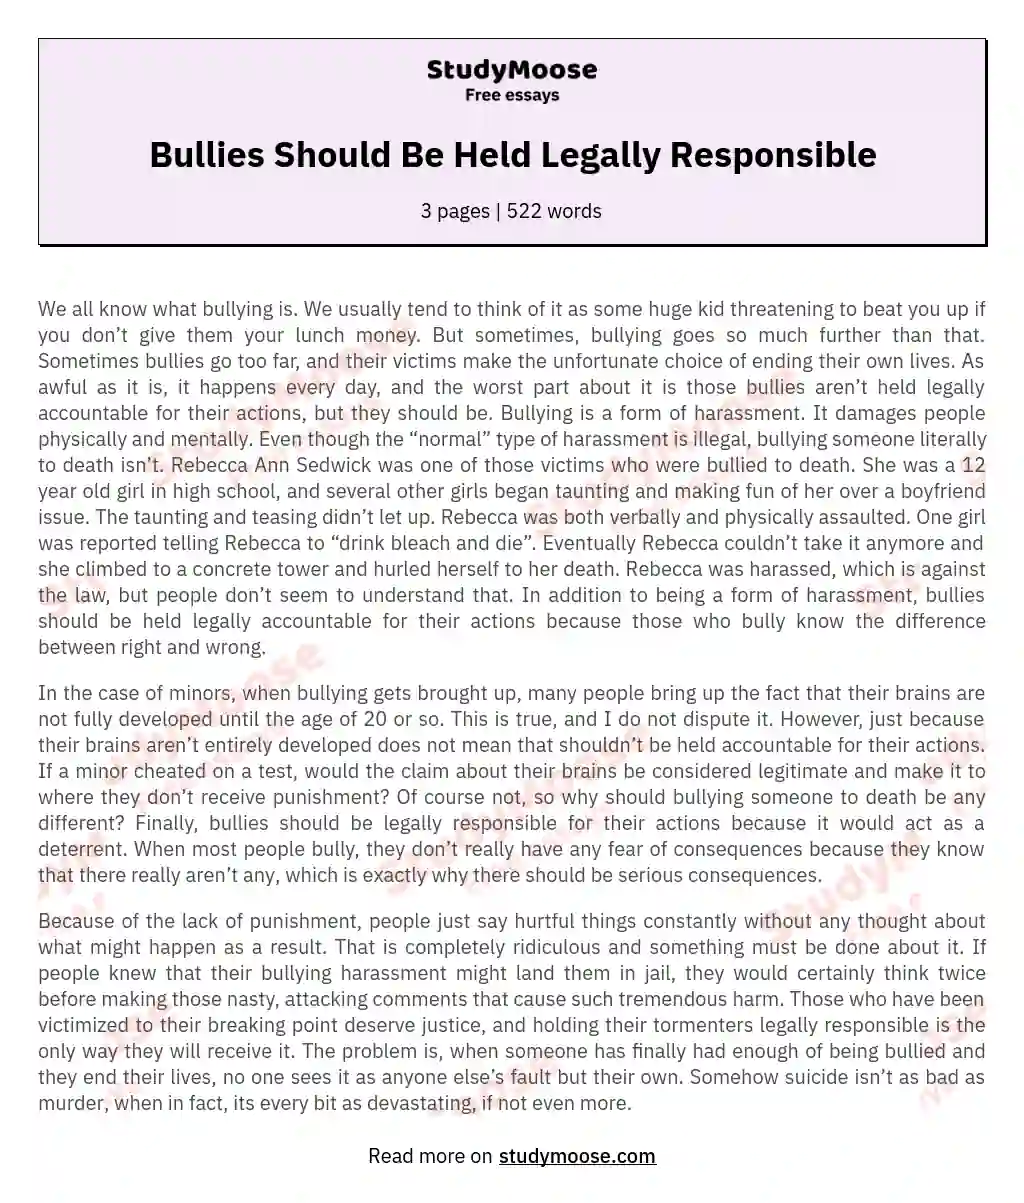 Bullies Should Be Held Legally Responsible essay